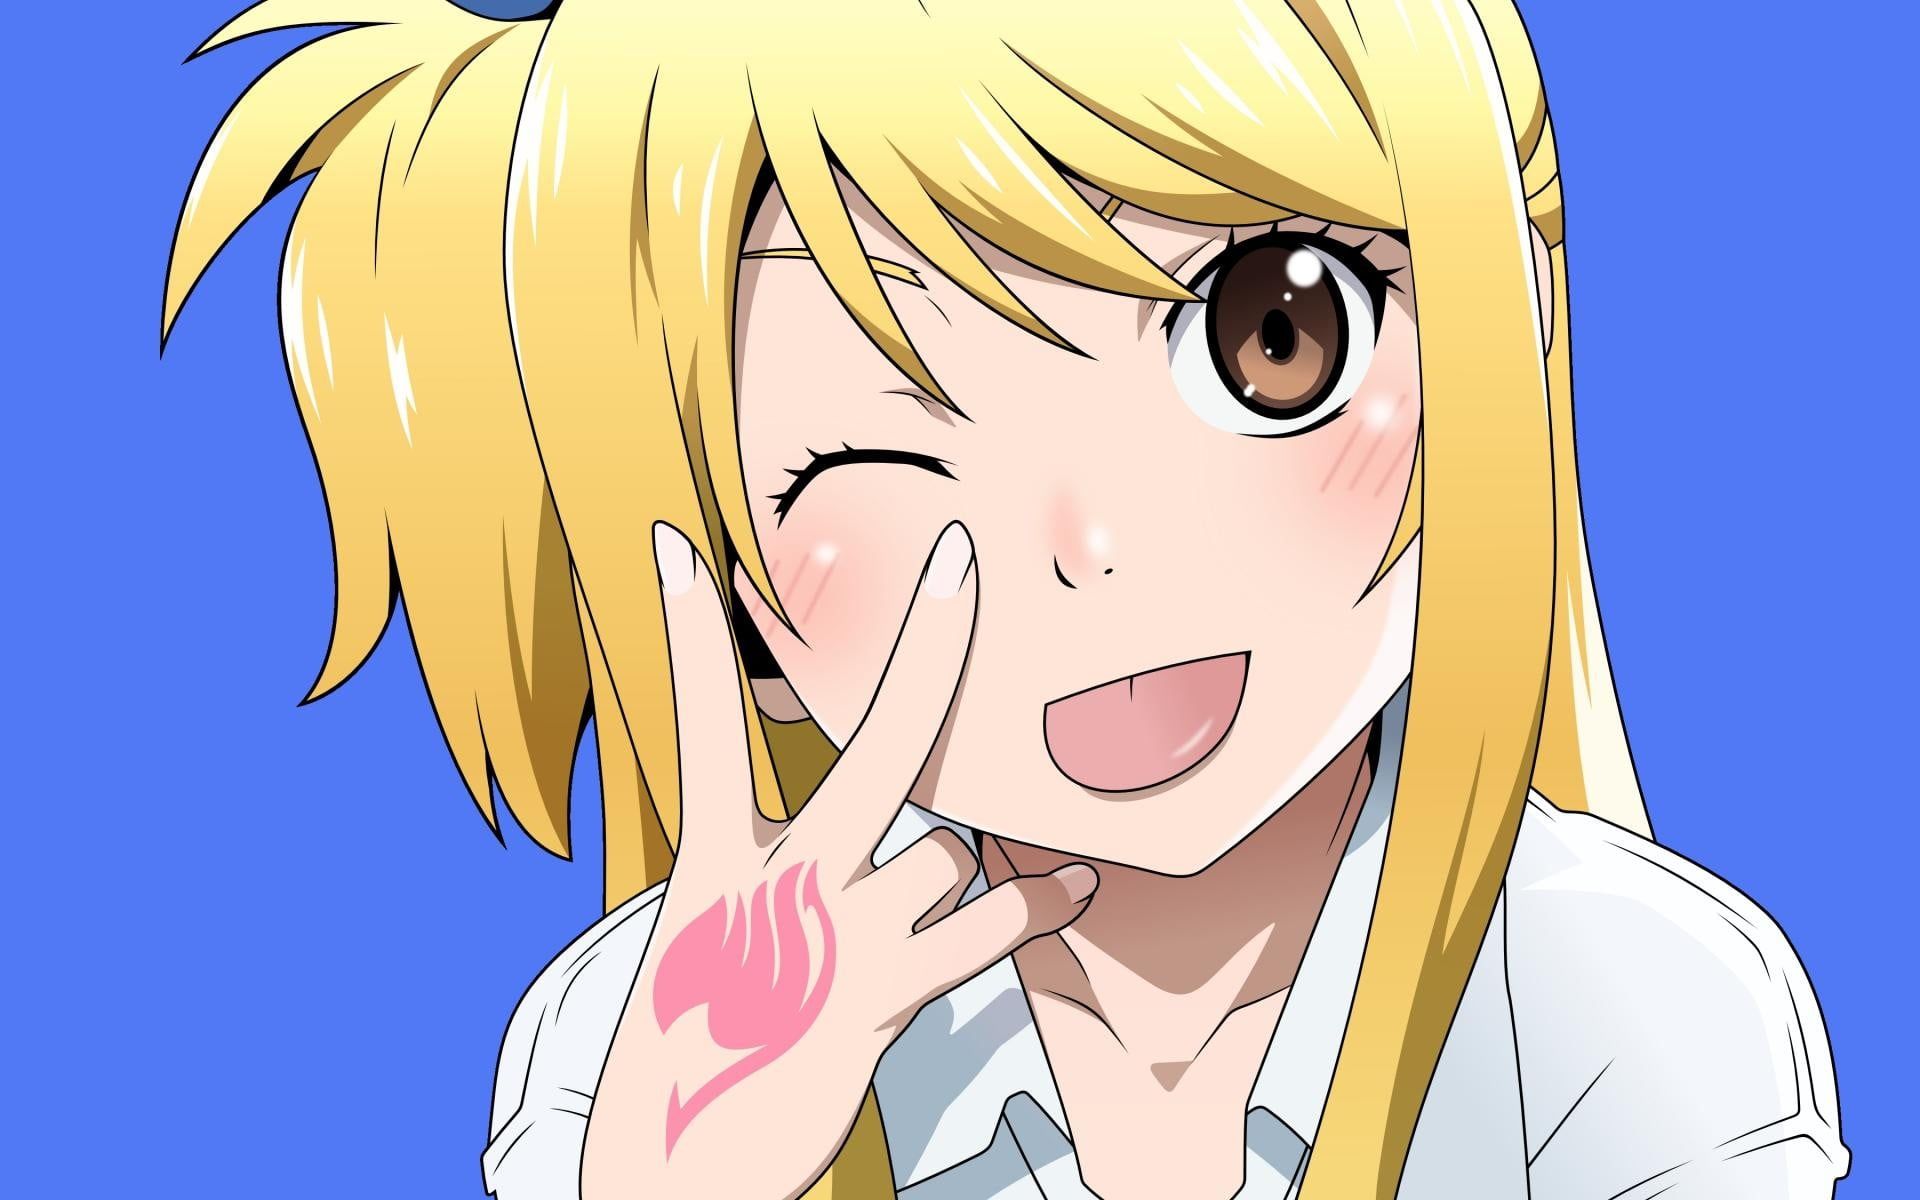 3. "Lucy Heartfilia" from Fairy Tail - wide 2